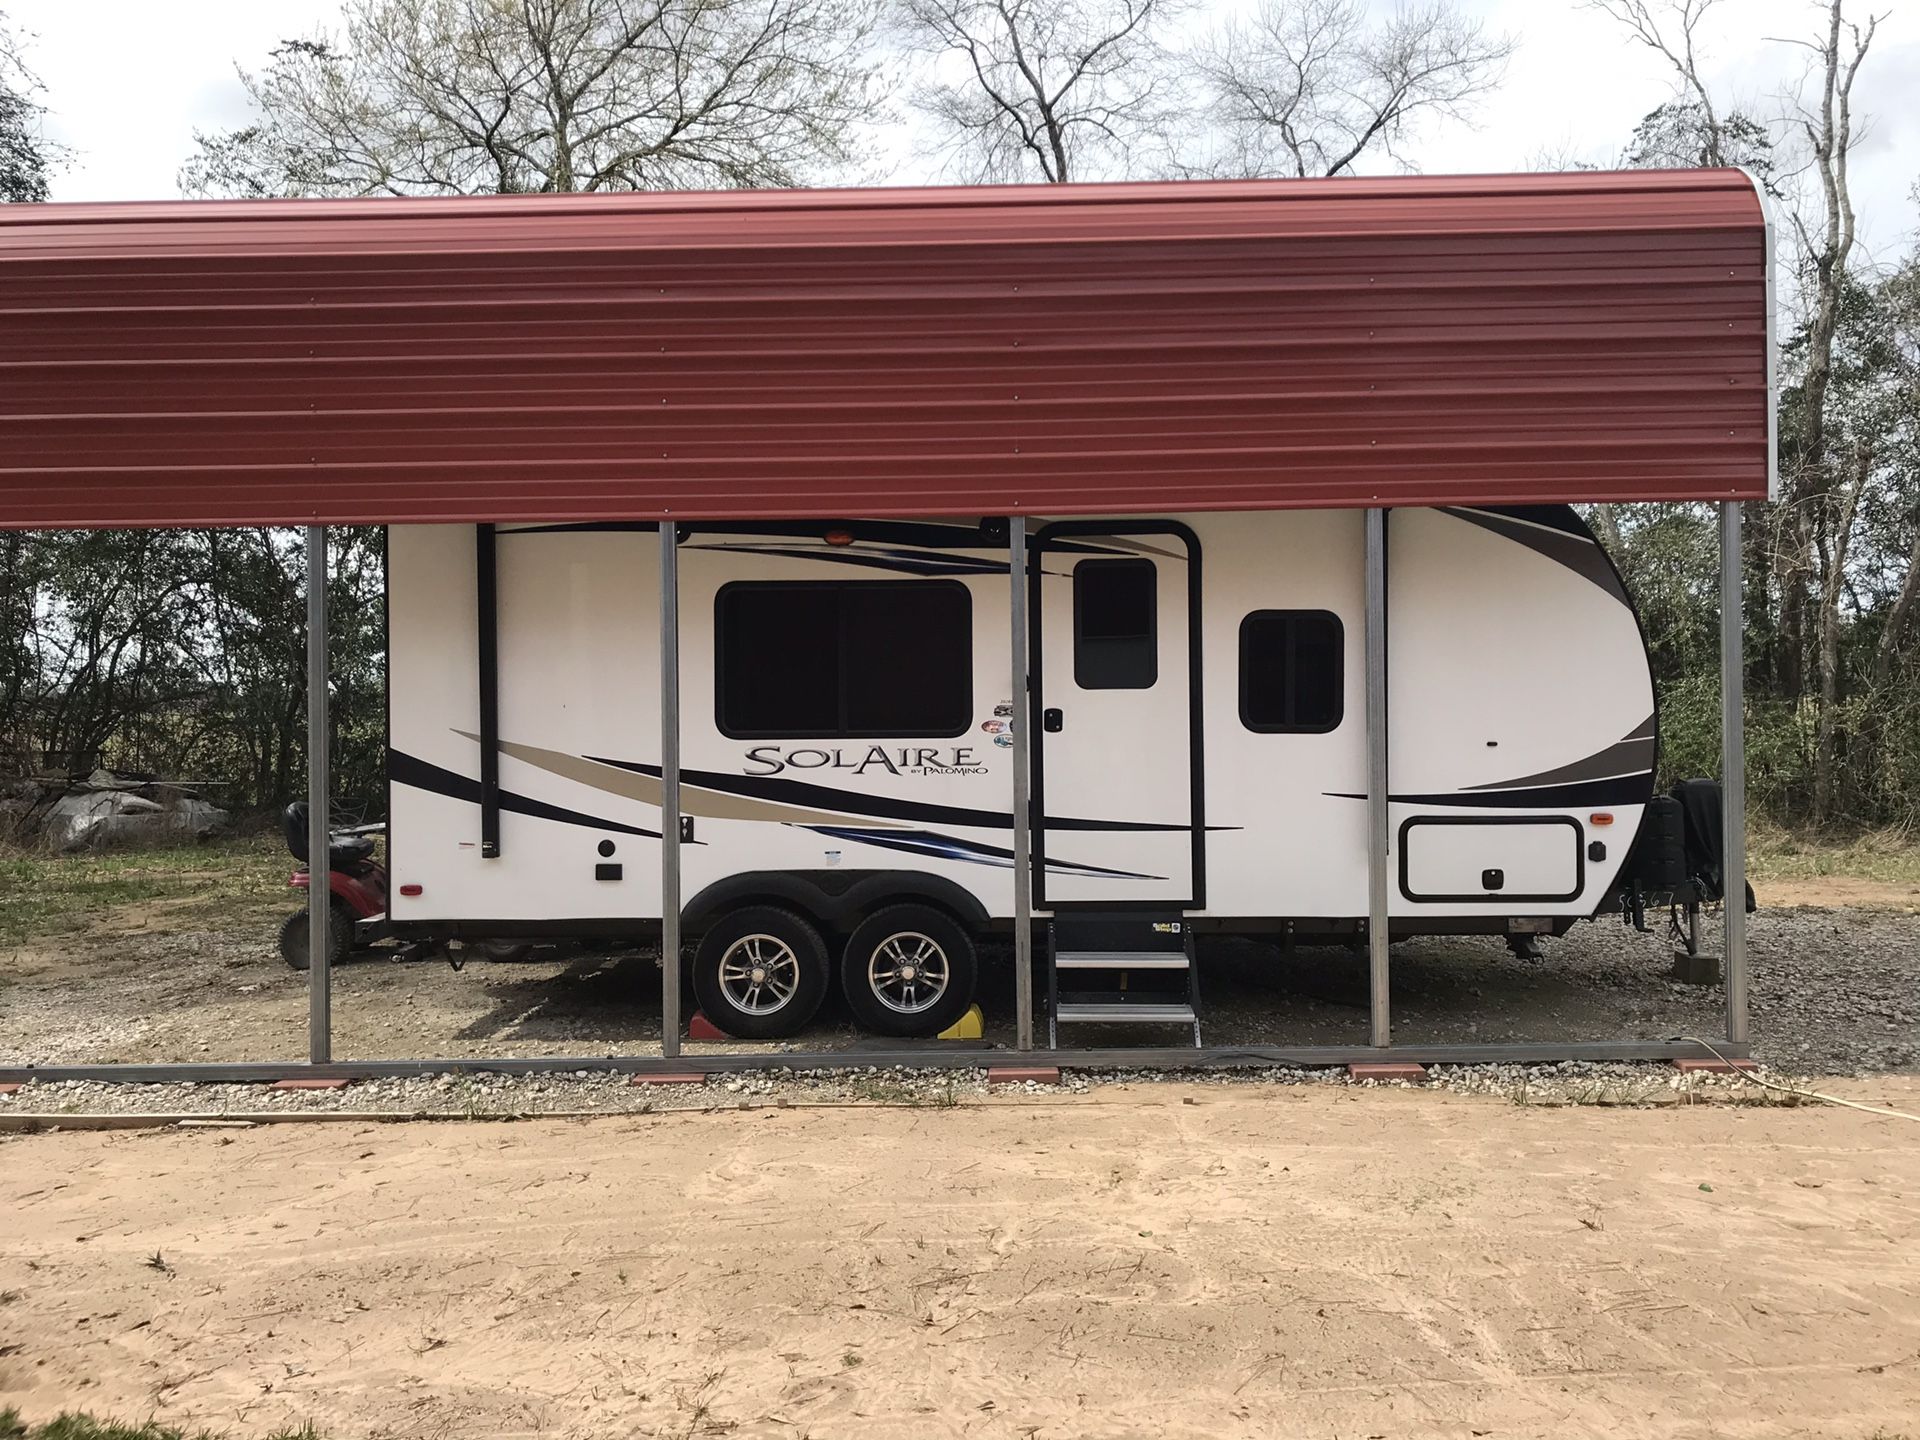 21 foot Solaire by Palomino. Used it once for three weeks and decided we wanted a motorhome. It still has that brand new smell!!! Non-smokers!!!